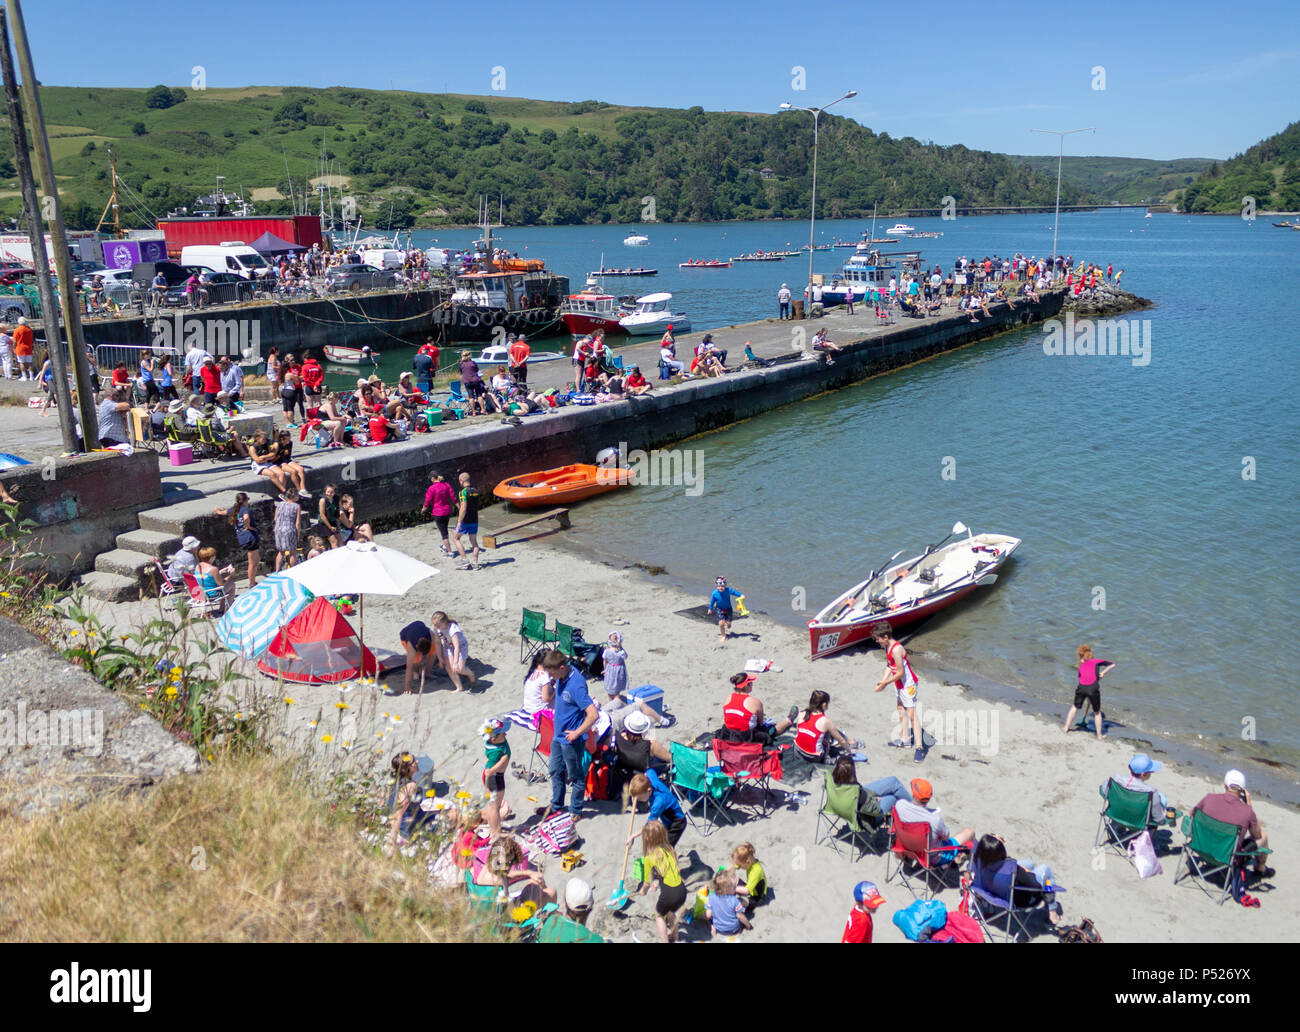 Union Hall, West Cork, Ireland. 24th June, 2018. The Union Hall Rowing Regatta took place today under a clear blue sky and blazing sunshine. The teams come from all over West Cork and the ideal weather conditions made for a great day out by the sea for spectators and crews alike: aphperspective/Alamy Live News Stock Photo